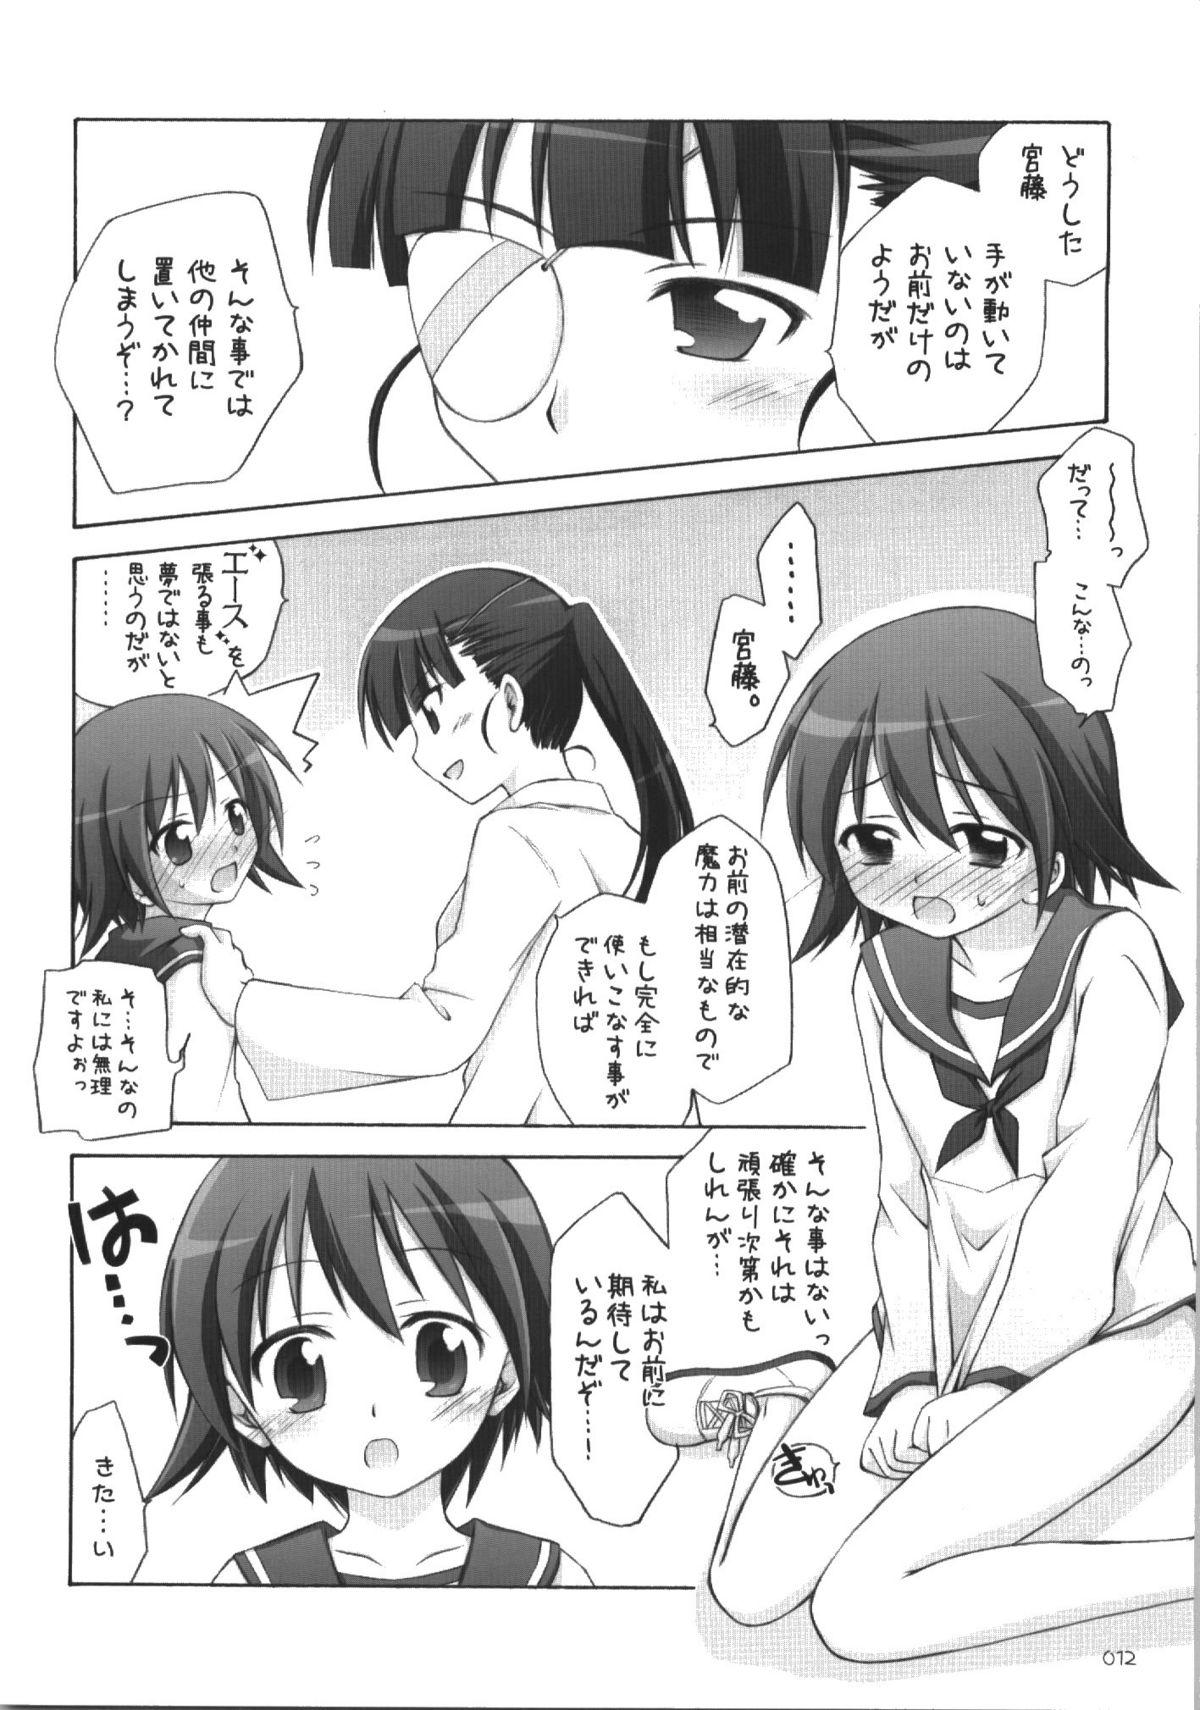 Transvestite s.n.e.g? - Strike witches Culo - Page 12